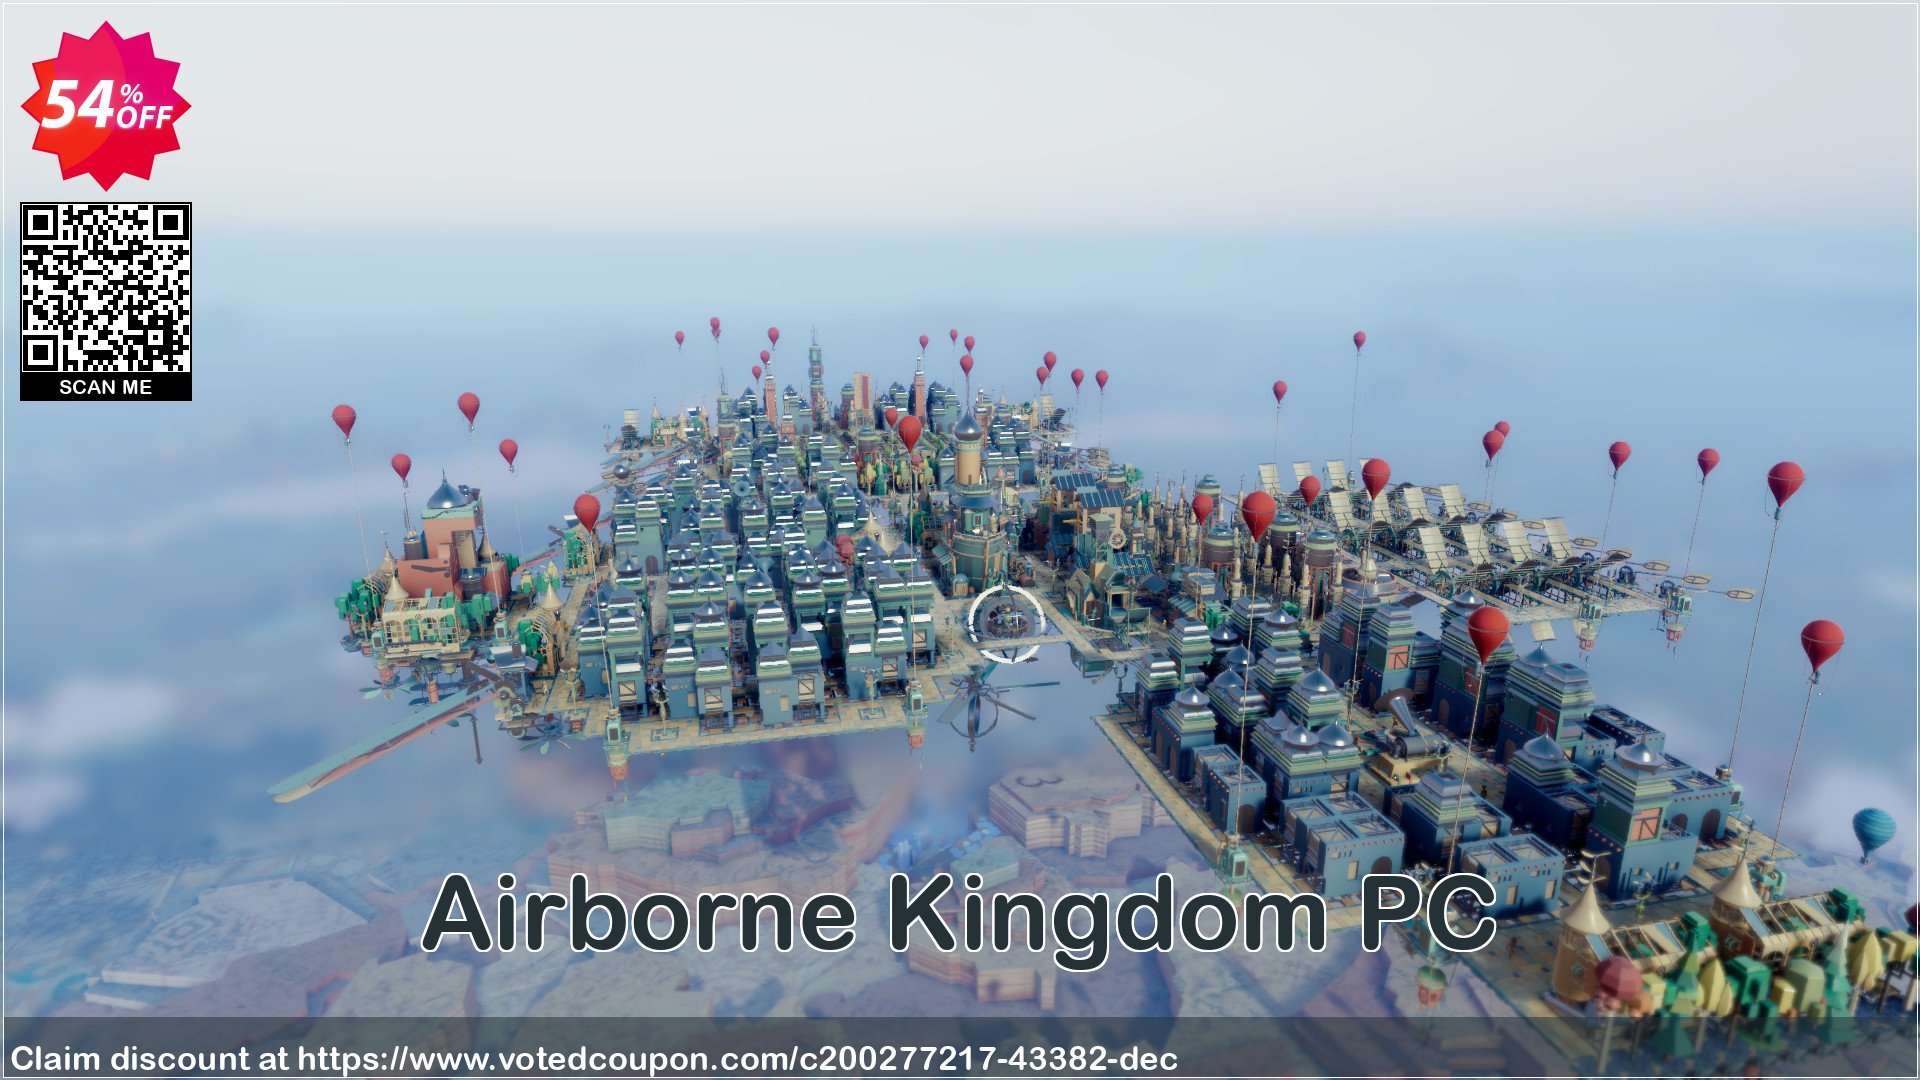 Airborne Kingdom PC Coupon Code May 2024, 54% OFF - VotedCoupon